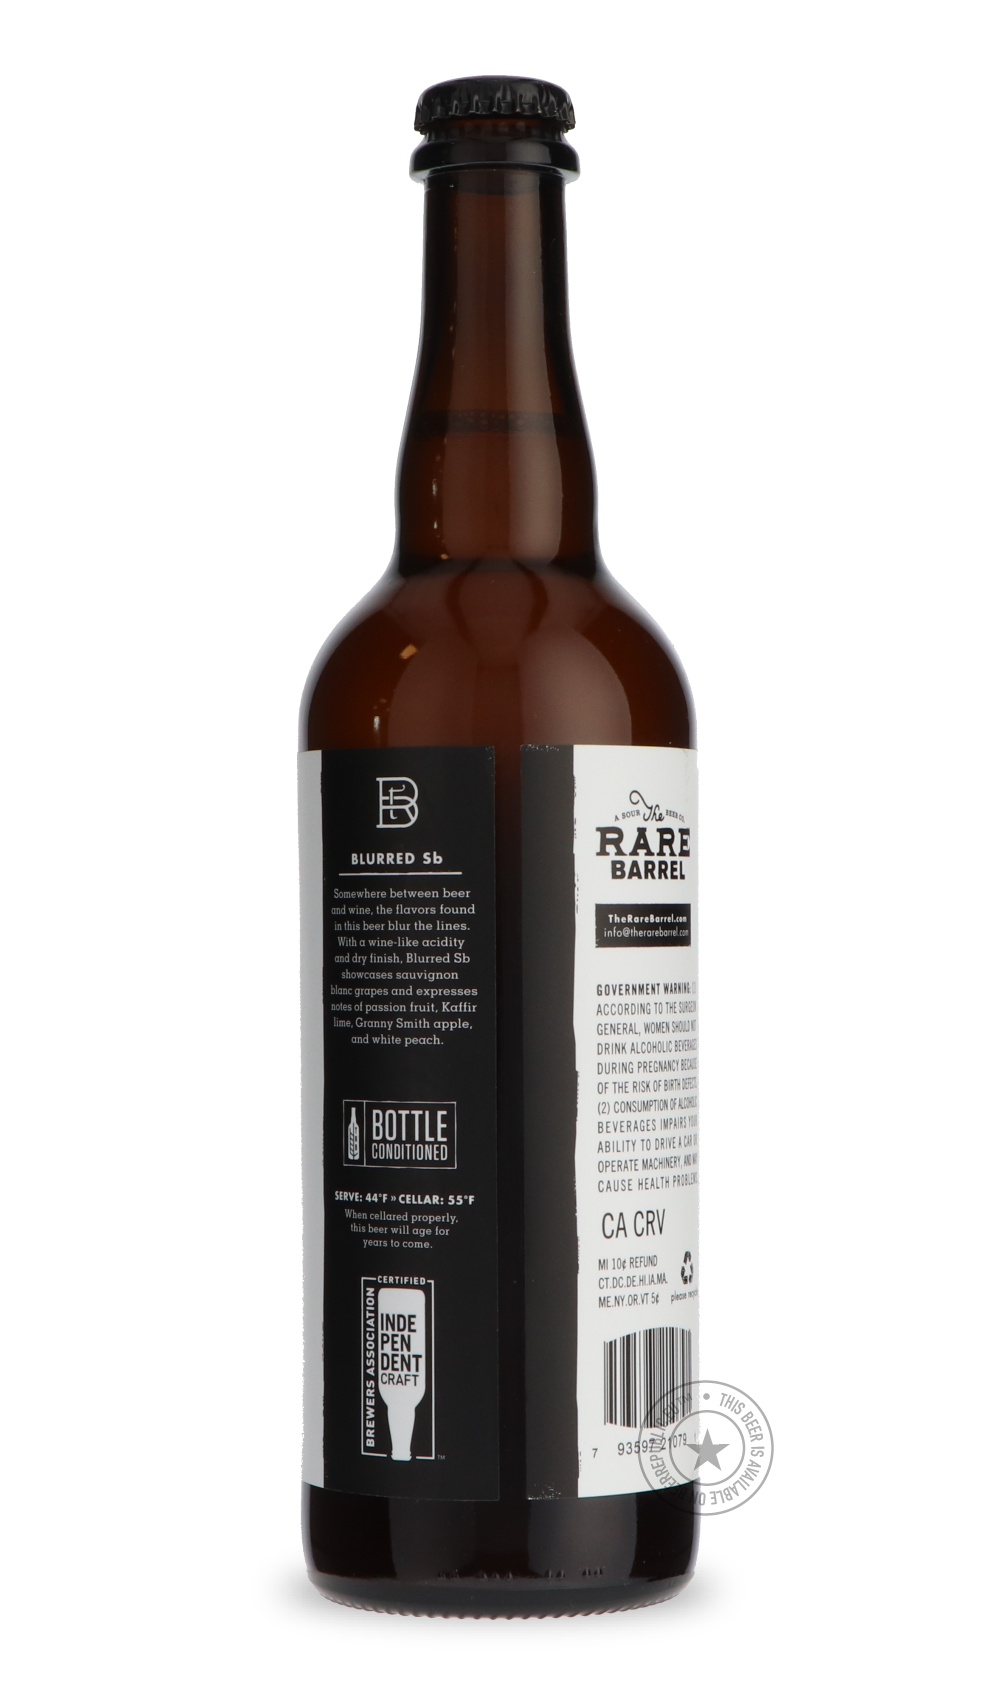 -The Rare Barrel- Blurred Sb '19-Sour / Wild & Fruity- Only @ Beer Republic - The best online beer store for American & Canadian craft beer - Buy beer online from the USA and Canada - Bier online kopen - Amerikaans bier kopen - Craft beer store - Craft beer kopen - Amerikanisch bier kaufen - Bier online kaufen - Acheter biere online - IPA - Stout - Porter - New England IPA - Hazy IPA - Imperial Stout - Barrel Aged - Barrel Aged Imperial Stout - Brown - Dark beer - Blond - Blonde - Pilsner - Lager - Wheat - 